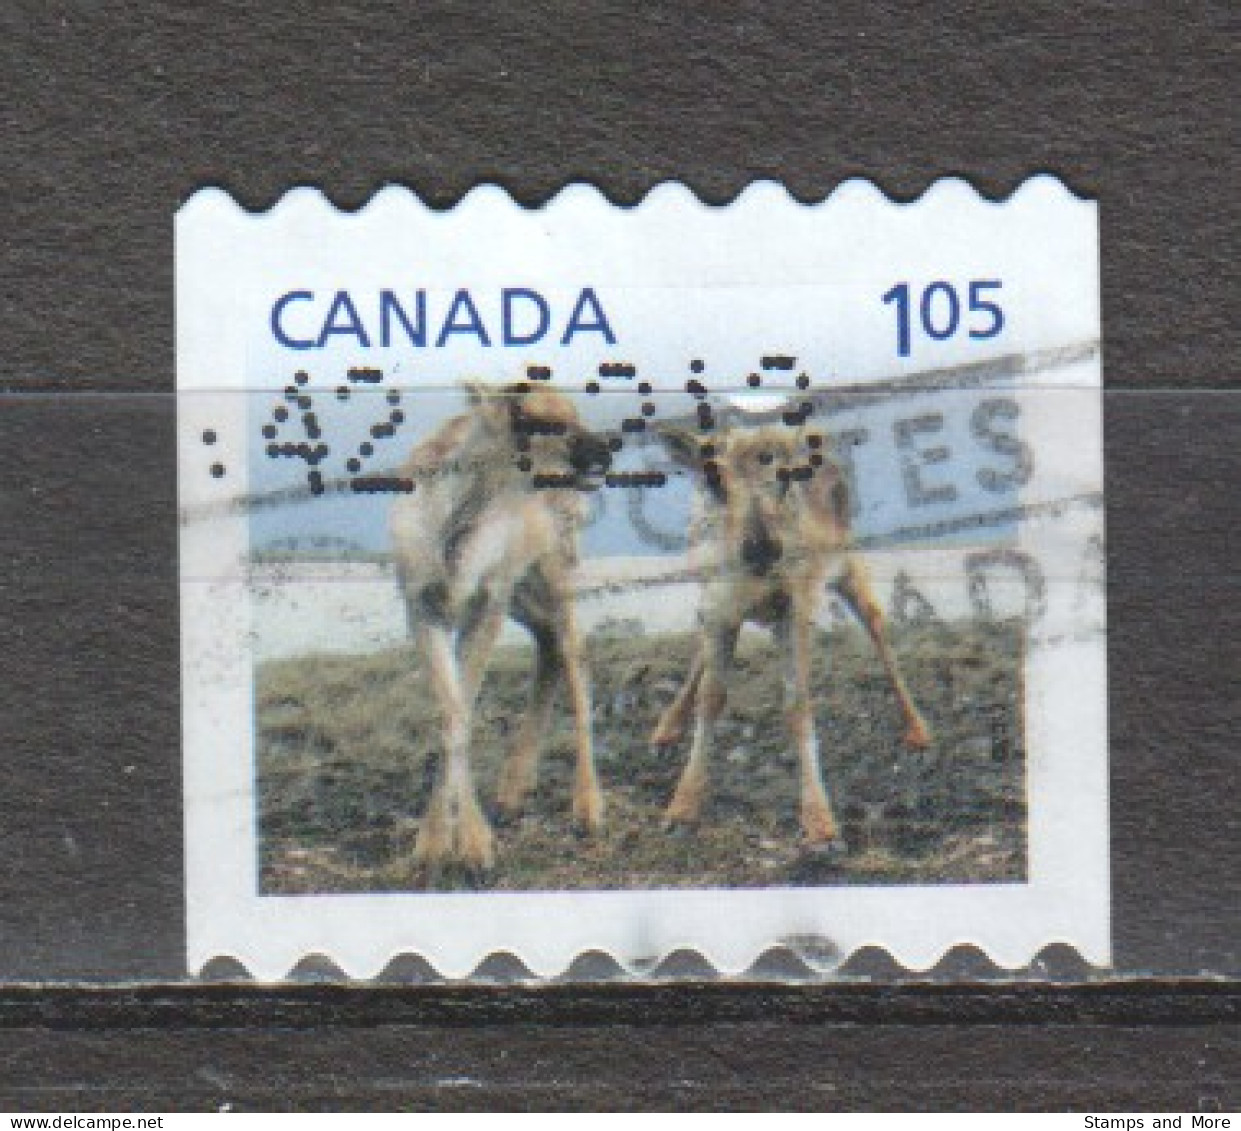 Canada 2012 Mi 2792 Canceled (1) - Used Stamps